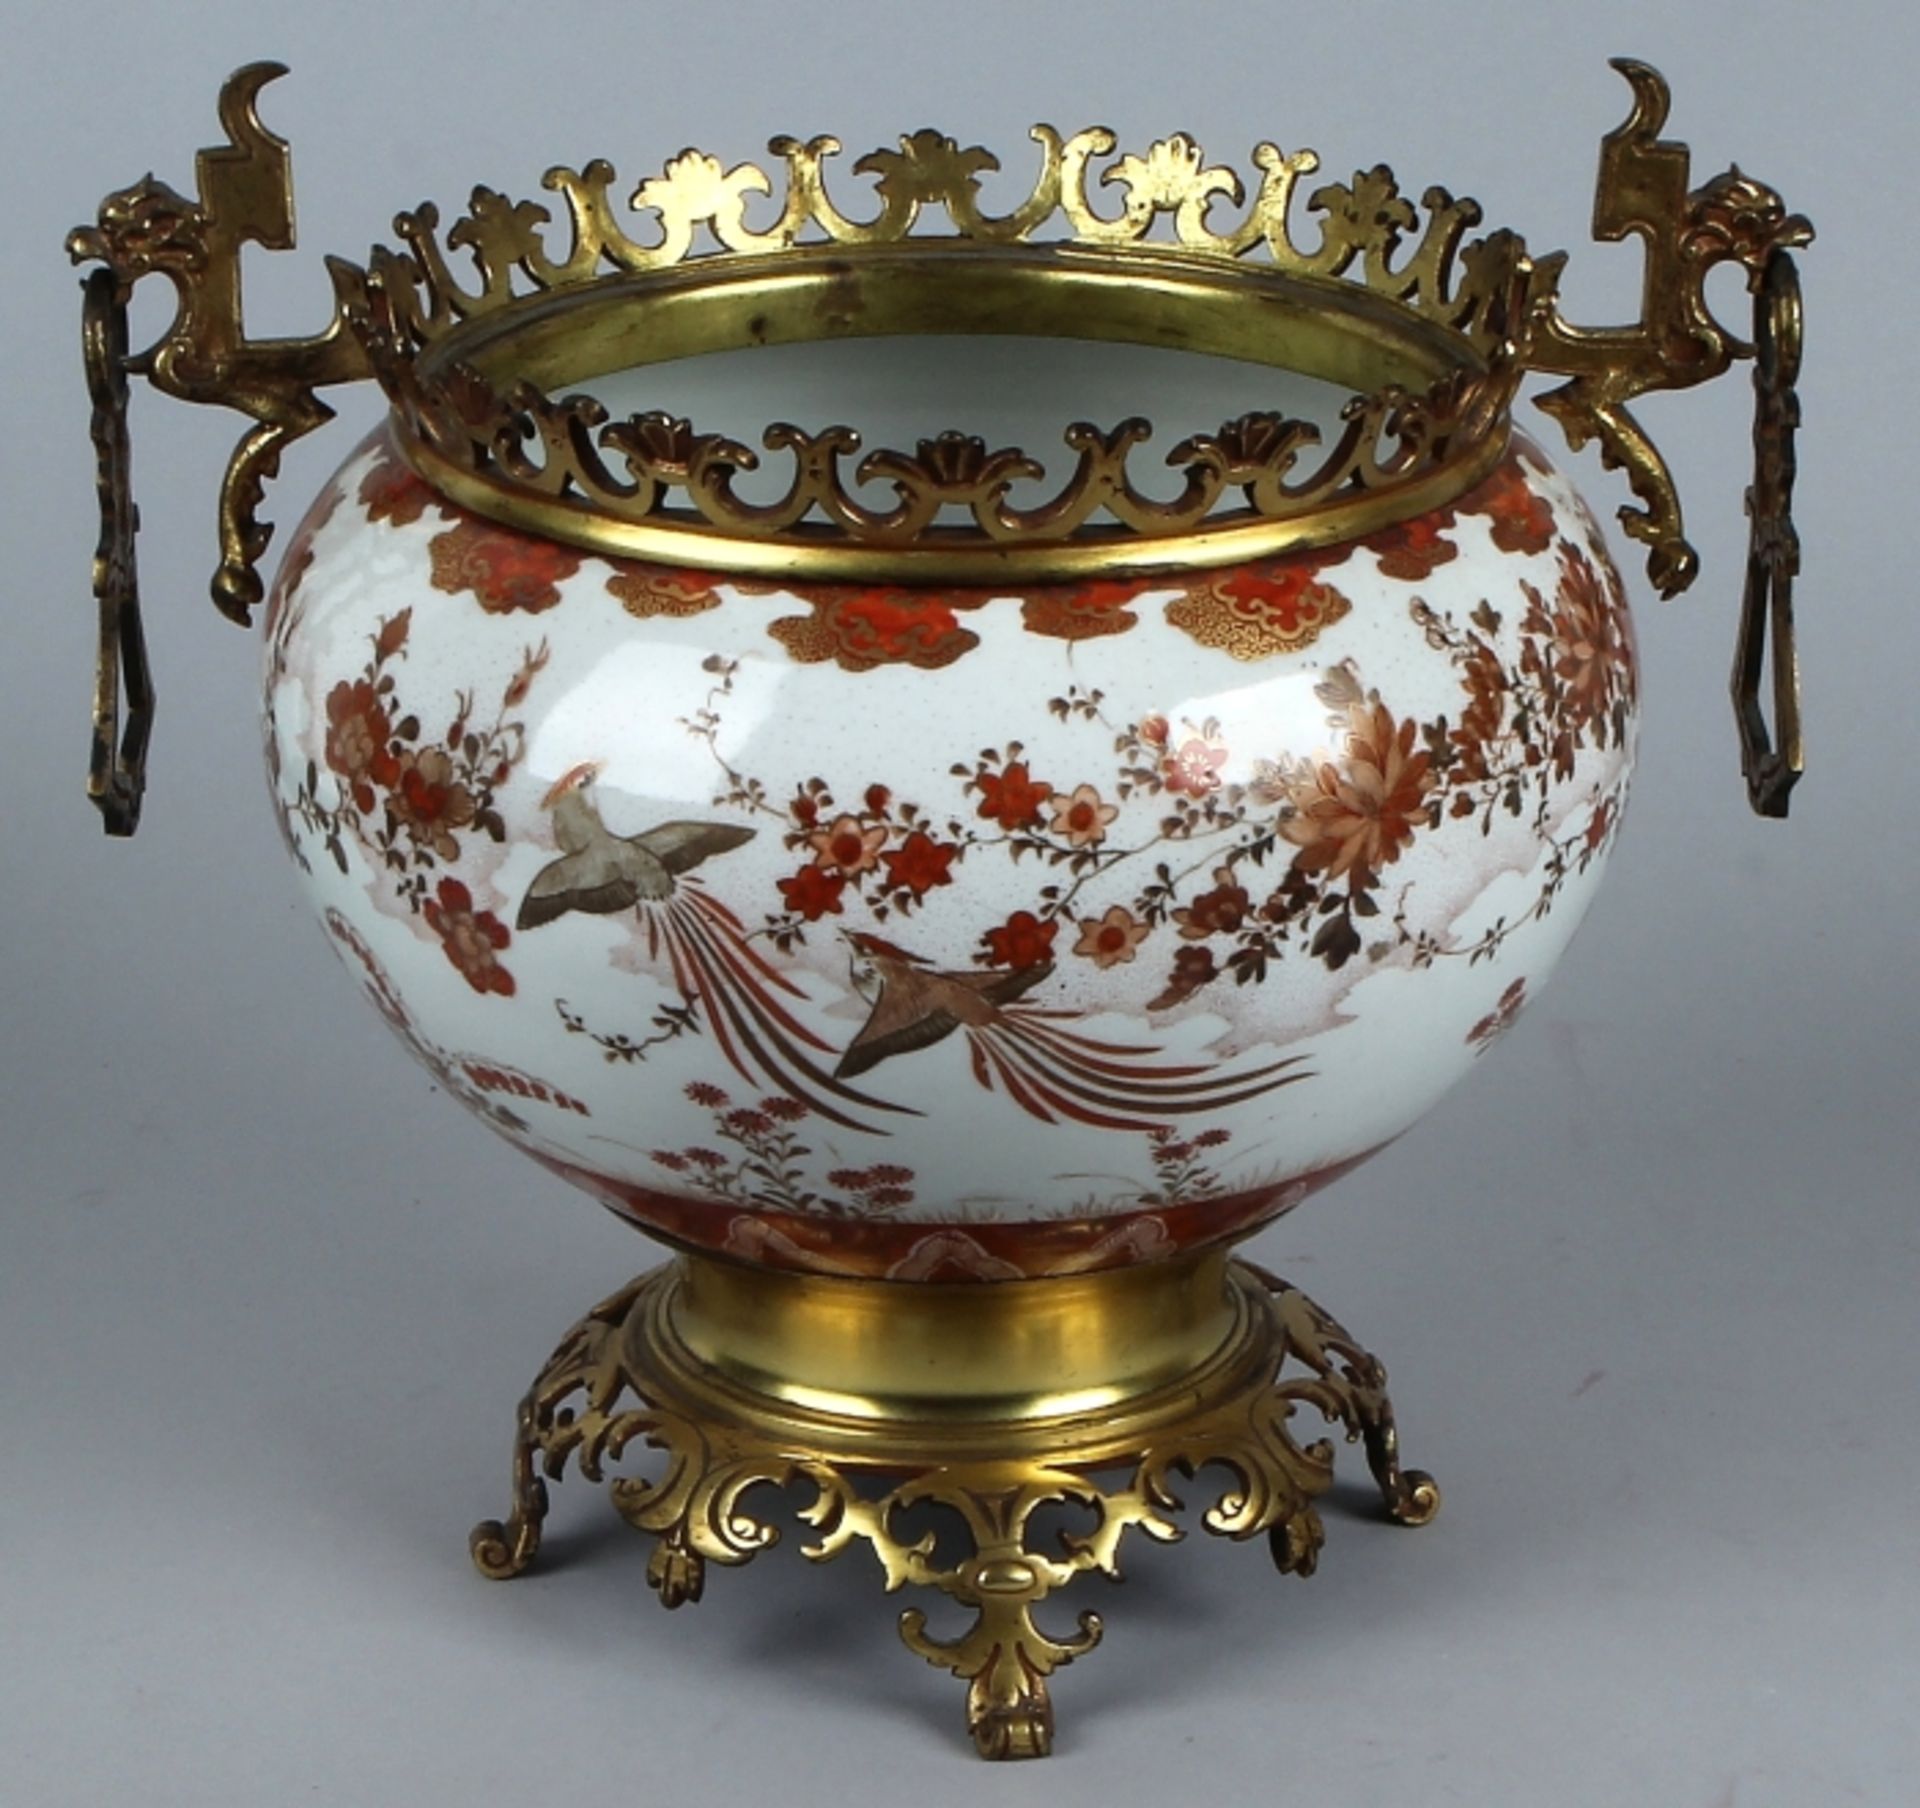 Satsuma porcelain cachepot with bronze mounts and scenery of flora and gold, in good original